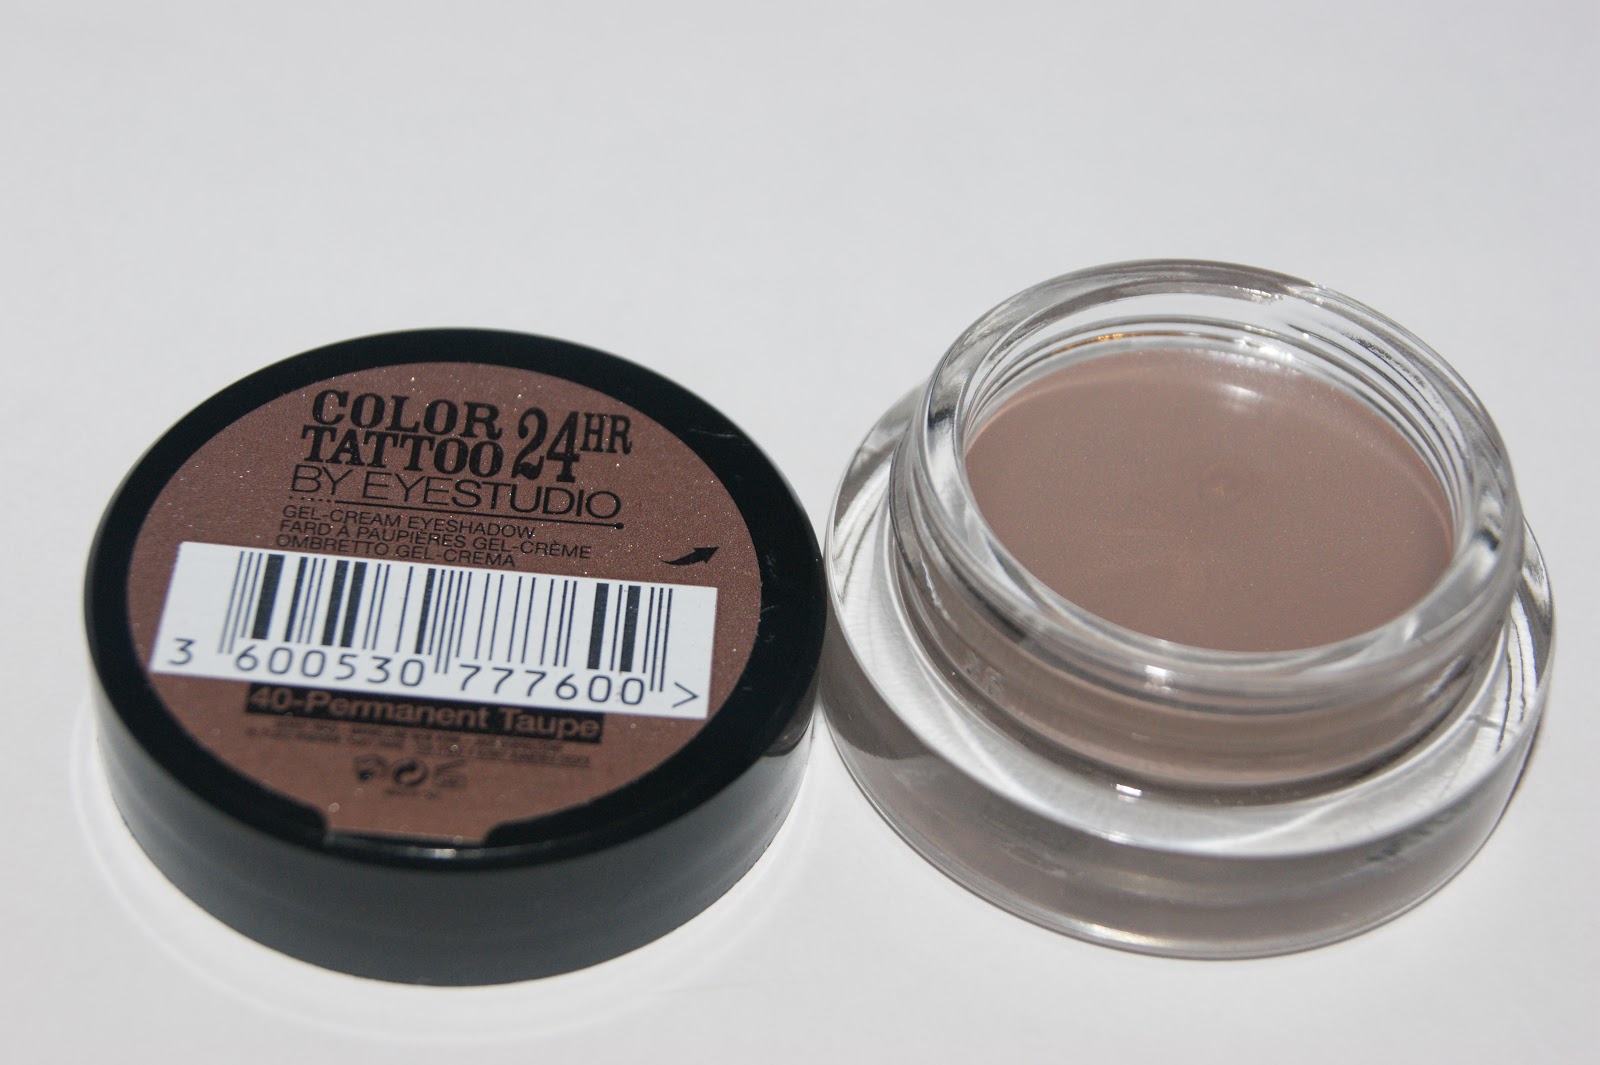 Maybelline Color Tattoo 24hr Eyeshadow in Permanent Taupe - Review | The  Sunday Girl